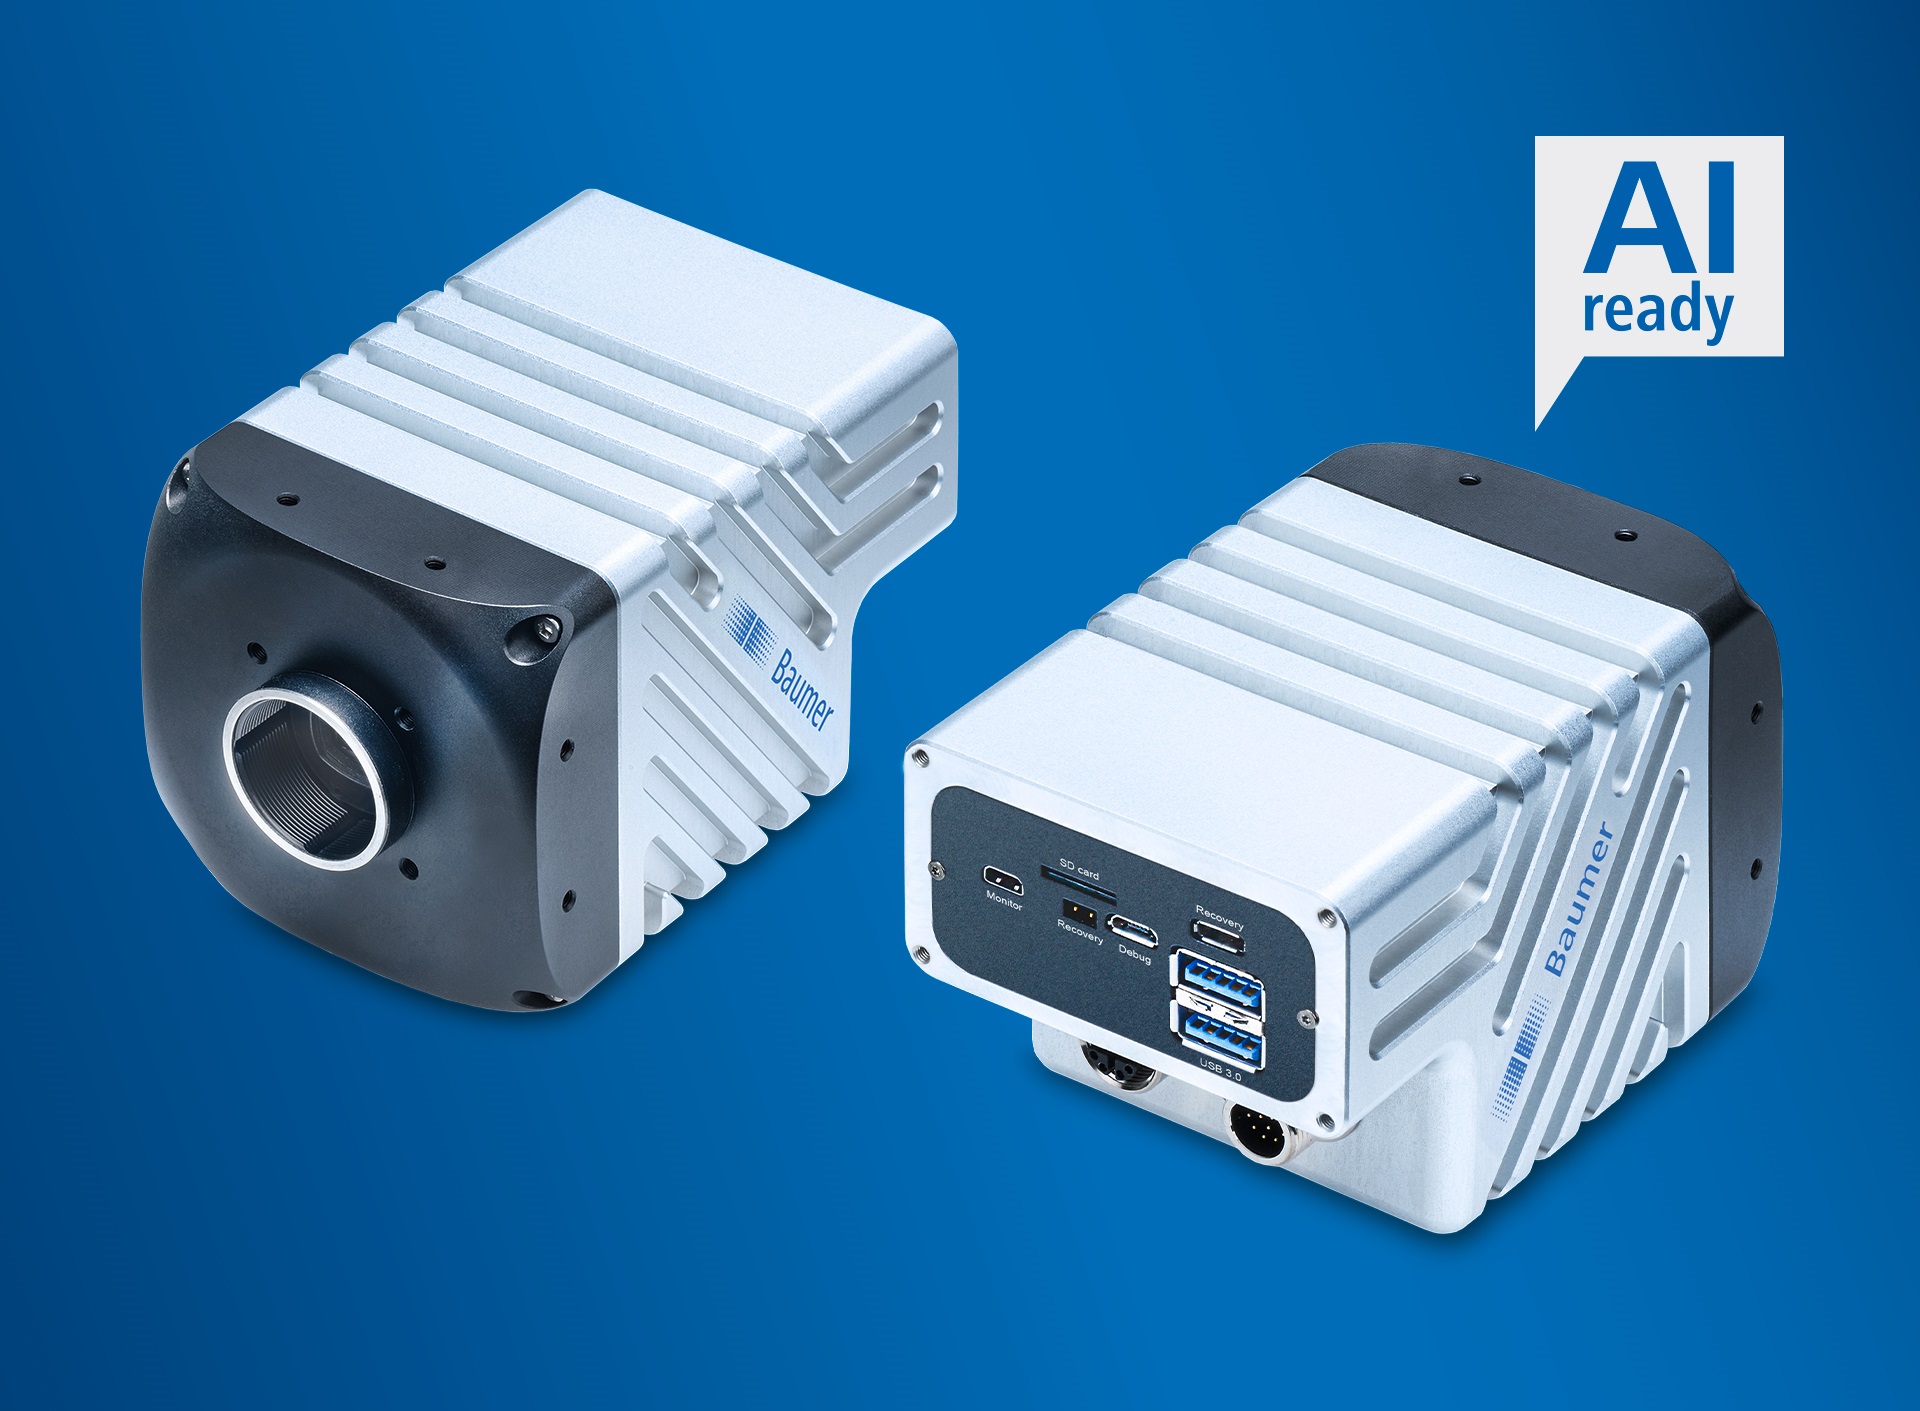 The new AX smart cameras from Baumer with NVIDIA Jetson modules are freely programmable for powerful AI applications.